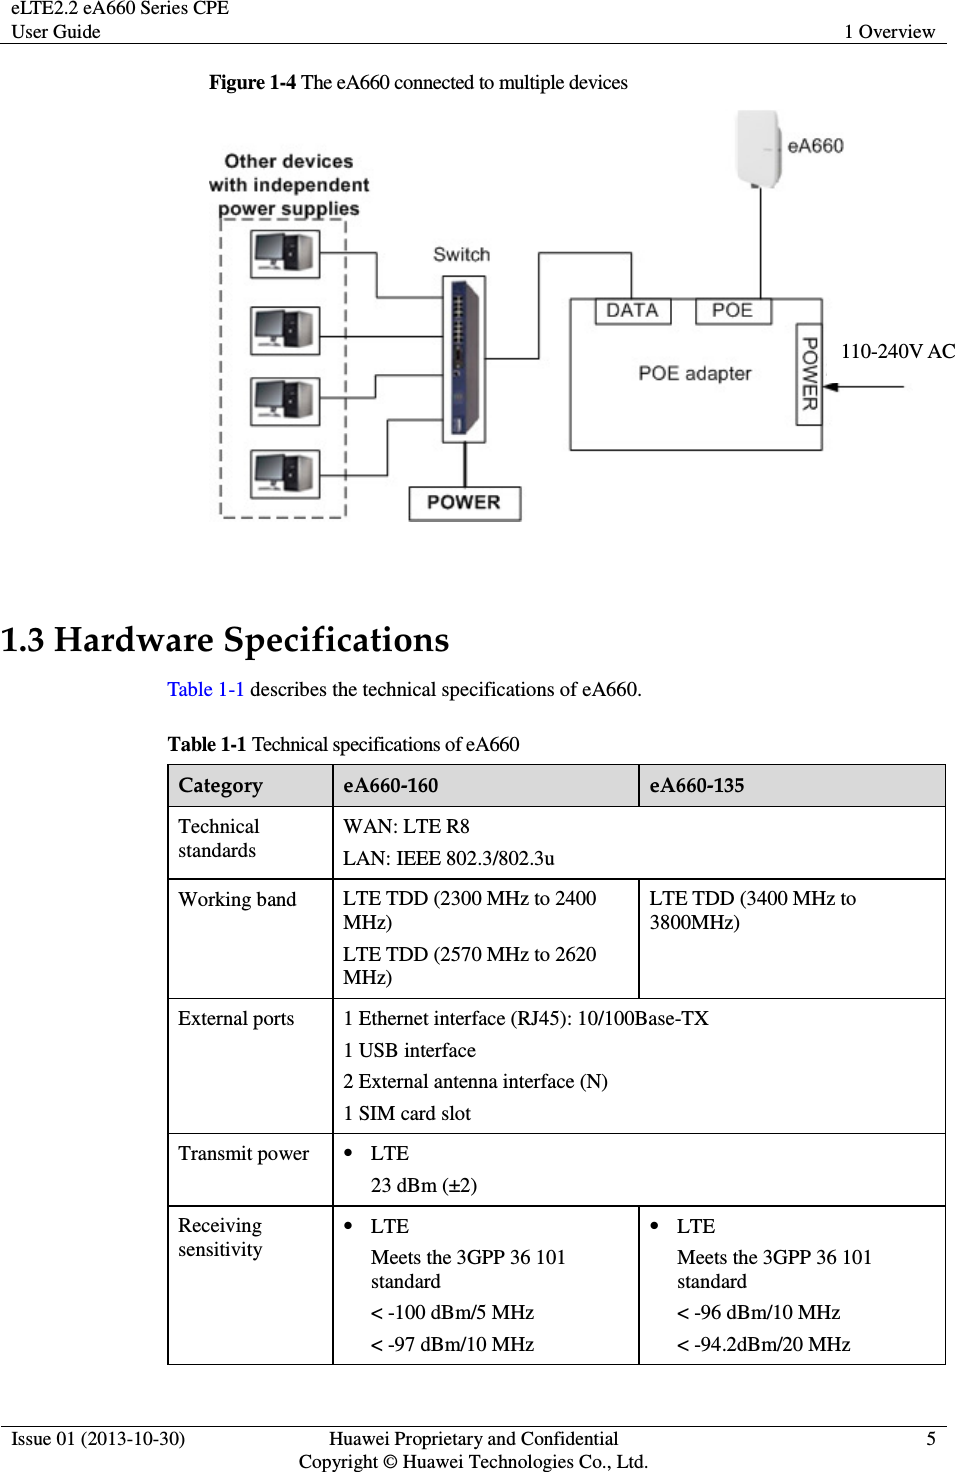 eLTE2.2 eA660 Series CPE User Guide  1 Overview  Issue 01 (2013-10-30)  Huawei Proprietary and Confidential                                     Copyright © Huawei Technologies Co., Ltd. 5  Figure 1-4 The eA660 connected to multiple devices   1.3 Hardware Specifications Table 1-1 describes the technical specifications of eA660. Table 1-1 Technical specifications of eA660 Category  eA660-160  eA660-135 Technical standards WAN: LTE R8 LAN: IEEE 802.3/802.3u Working band  LTE TDD (2300 MHz to 2400 MHz) LTE TDD (2570 MHz to 2620 MHz) LTE TDD (3400 MHz to 3800MHz)  External ports  1 Ethernet interface (RJ45): 10/100Base-TX 1 USB interface 2 External antenna interface (N) 1 SIM card slot Transmit power  LTE 23 dBm (±2) Receiving sensitivity  LTE Meets the 3GPP 36 101 standard &lt; -100 dBm/5 MHz &lt; -97 dBm/10 MHz  LTE Meets the 3GPP 36 101 standard &lt; -96 dBm/10 MHz &lt; -94.2dBm/20 MHz 110-240V AC 